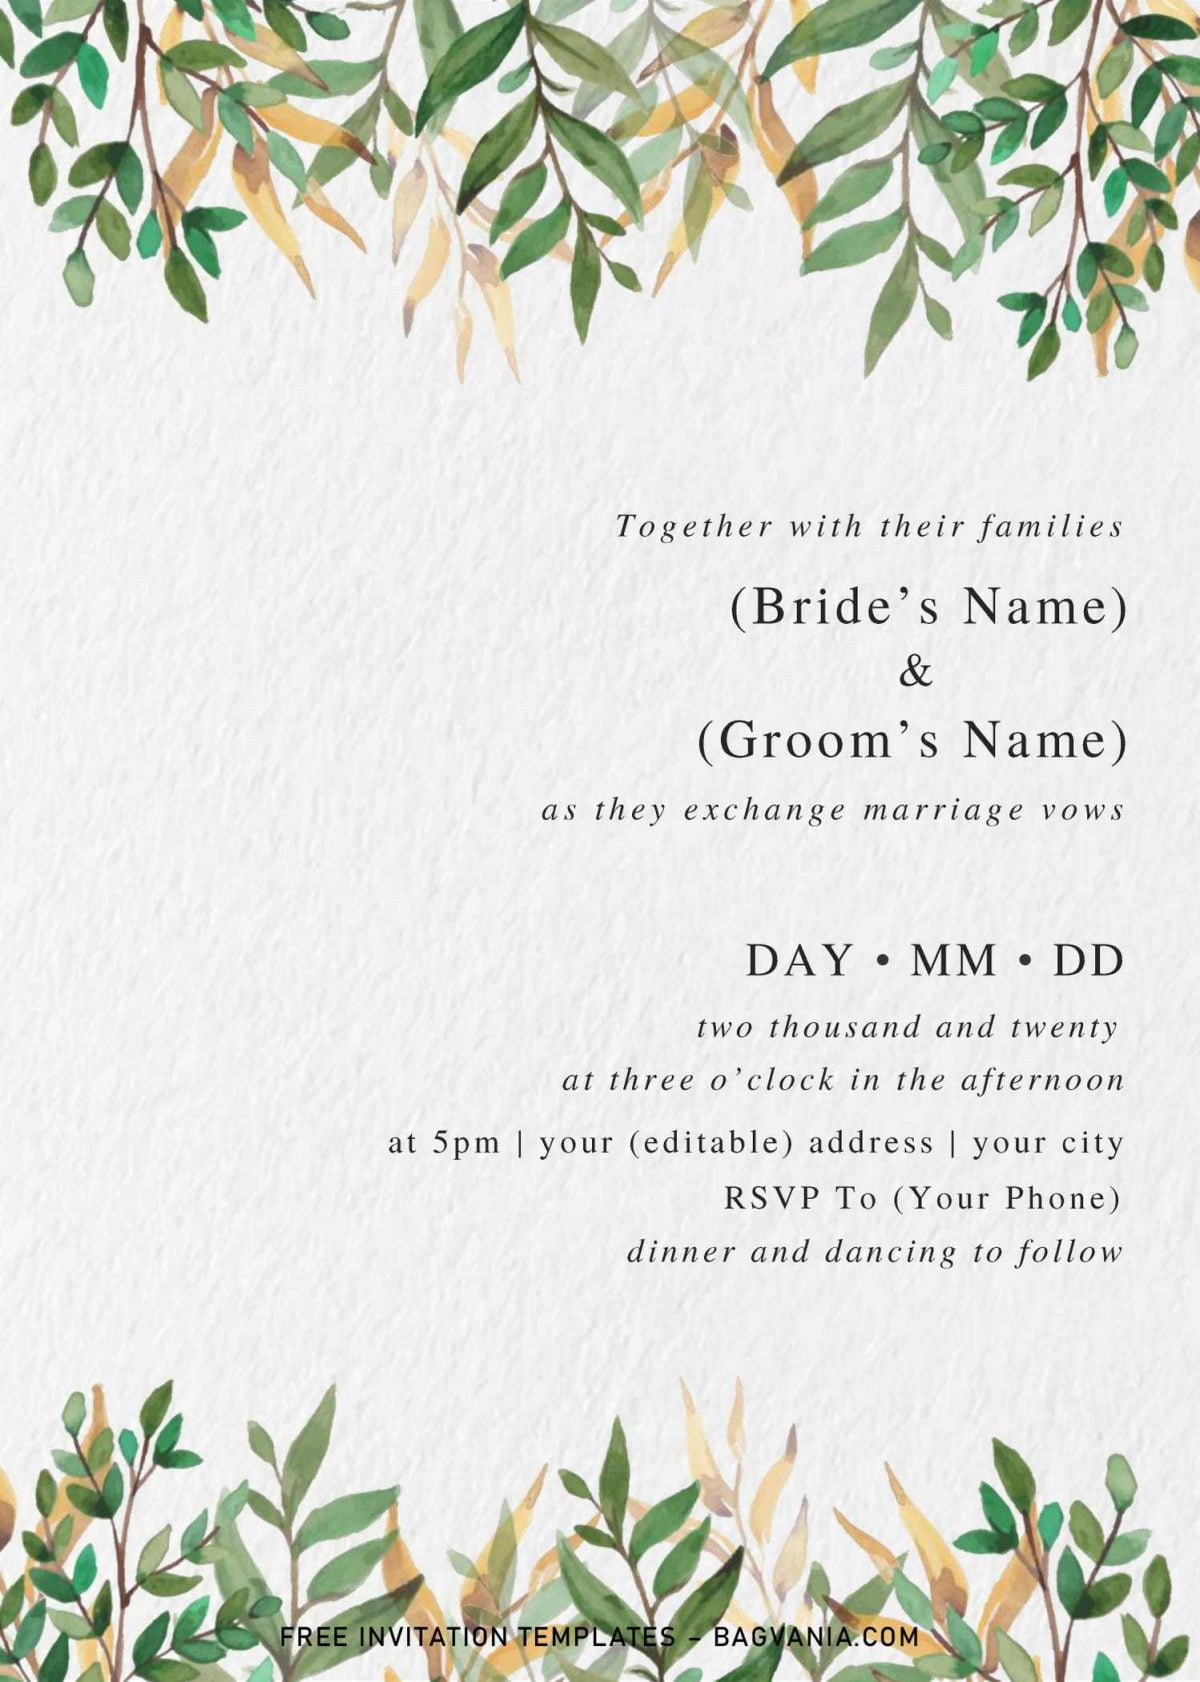 Modern Tropical Wedding Invitation Templates - Editable With MS Word and has canvas background